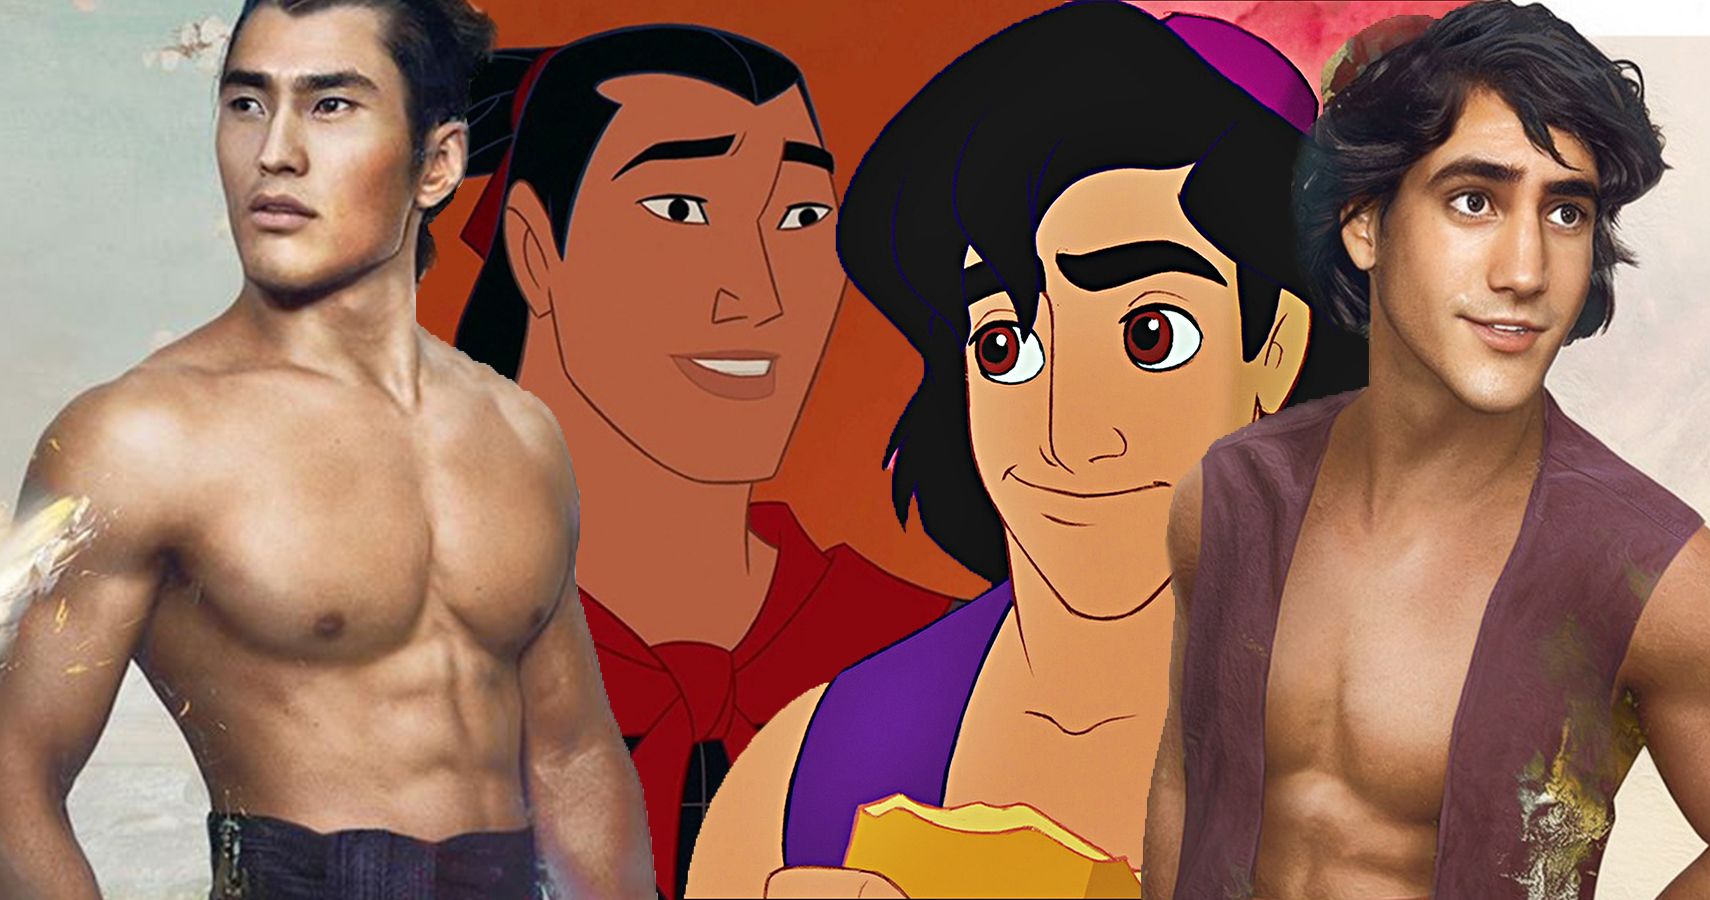 Top 10 Disney Princes' Reimagined As Real-Life Character Art